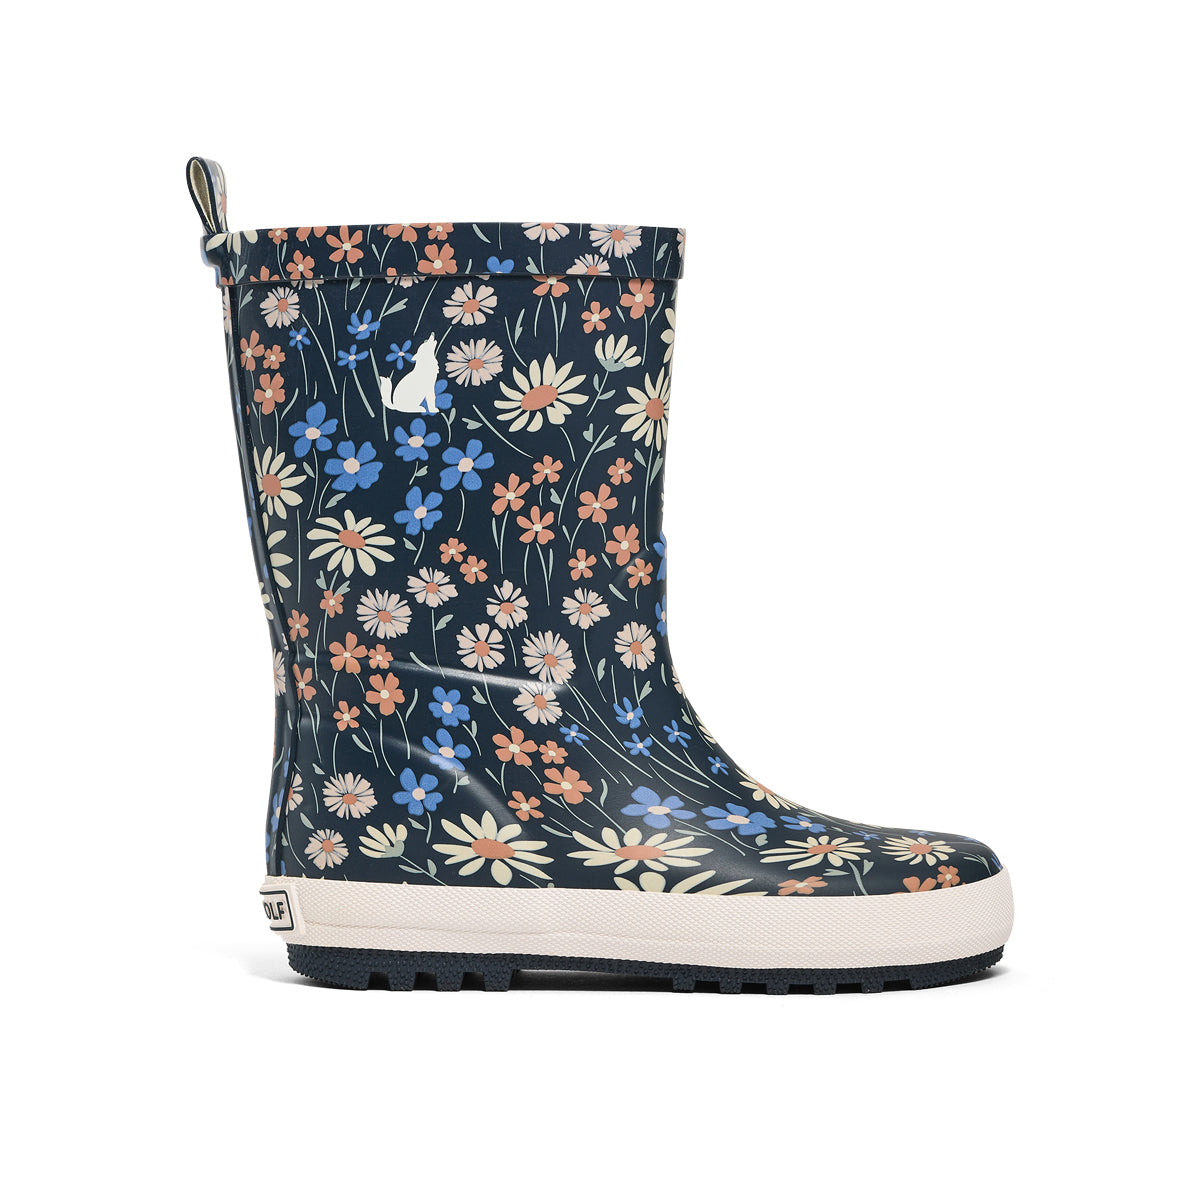 Crywolf | Rain Boots - Winter Floral